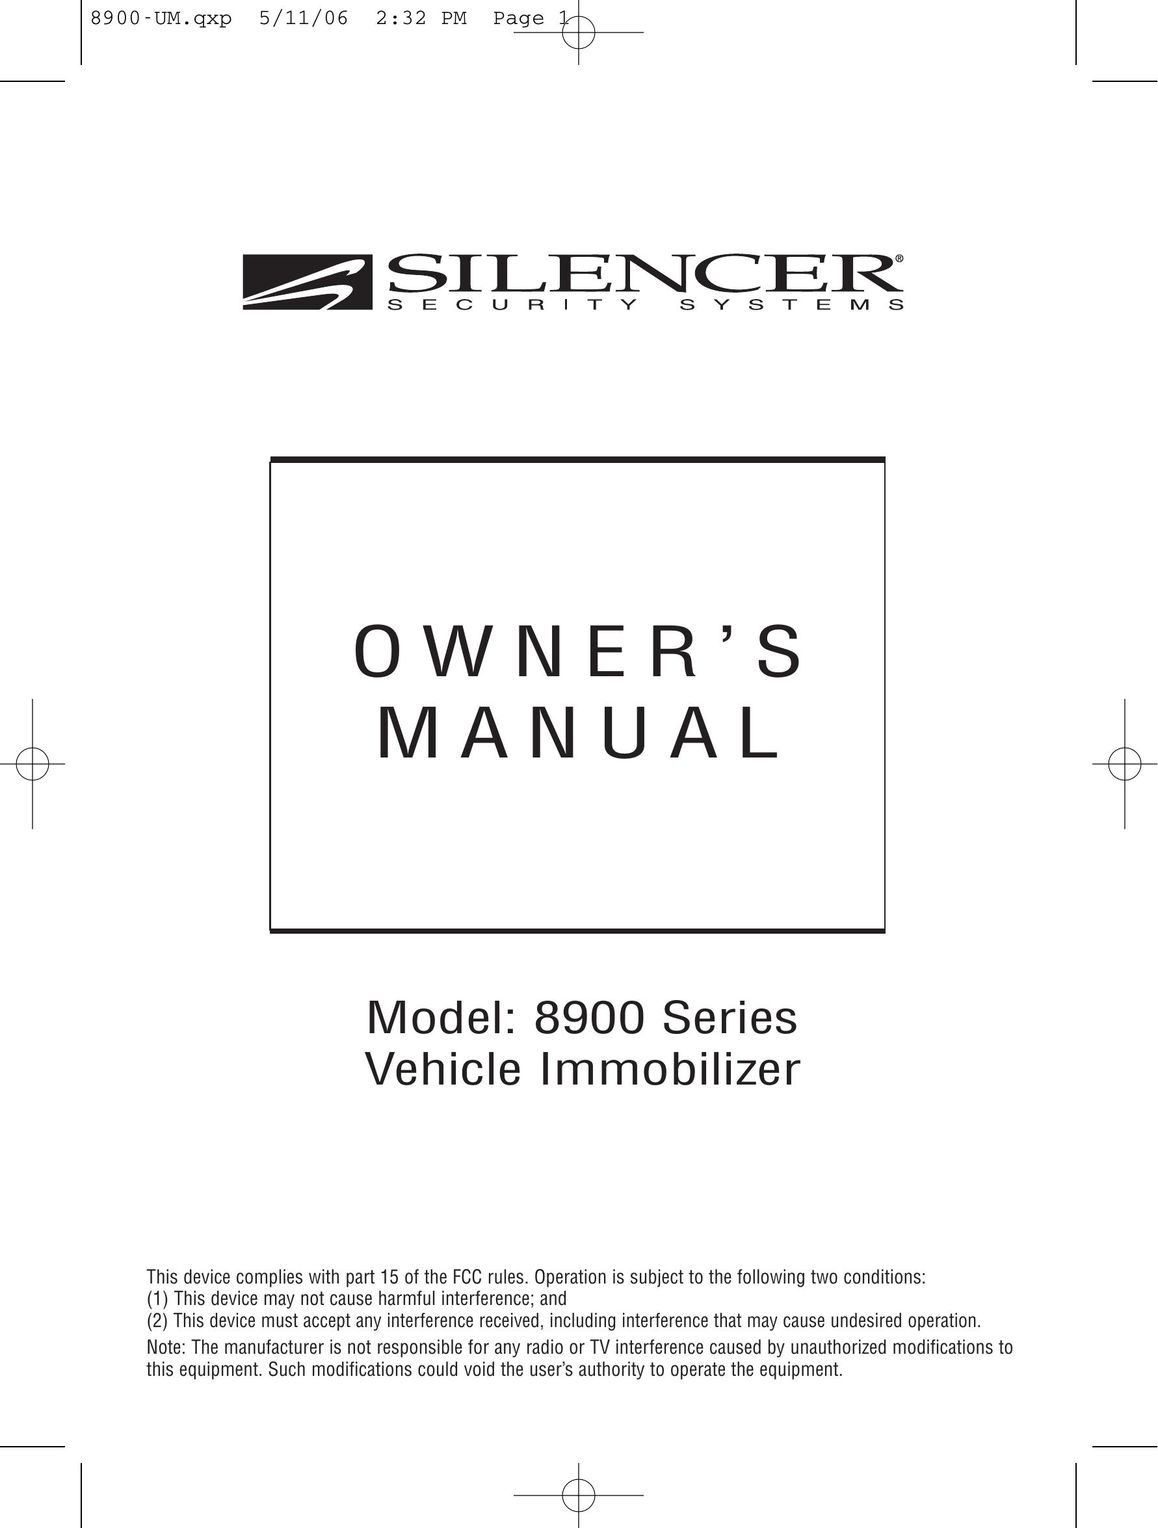 2nd Ave. 8900 Series Coffeemaker User Manual